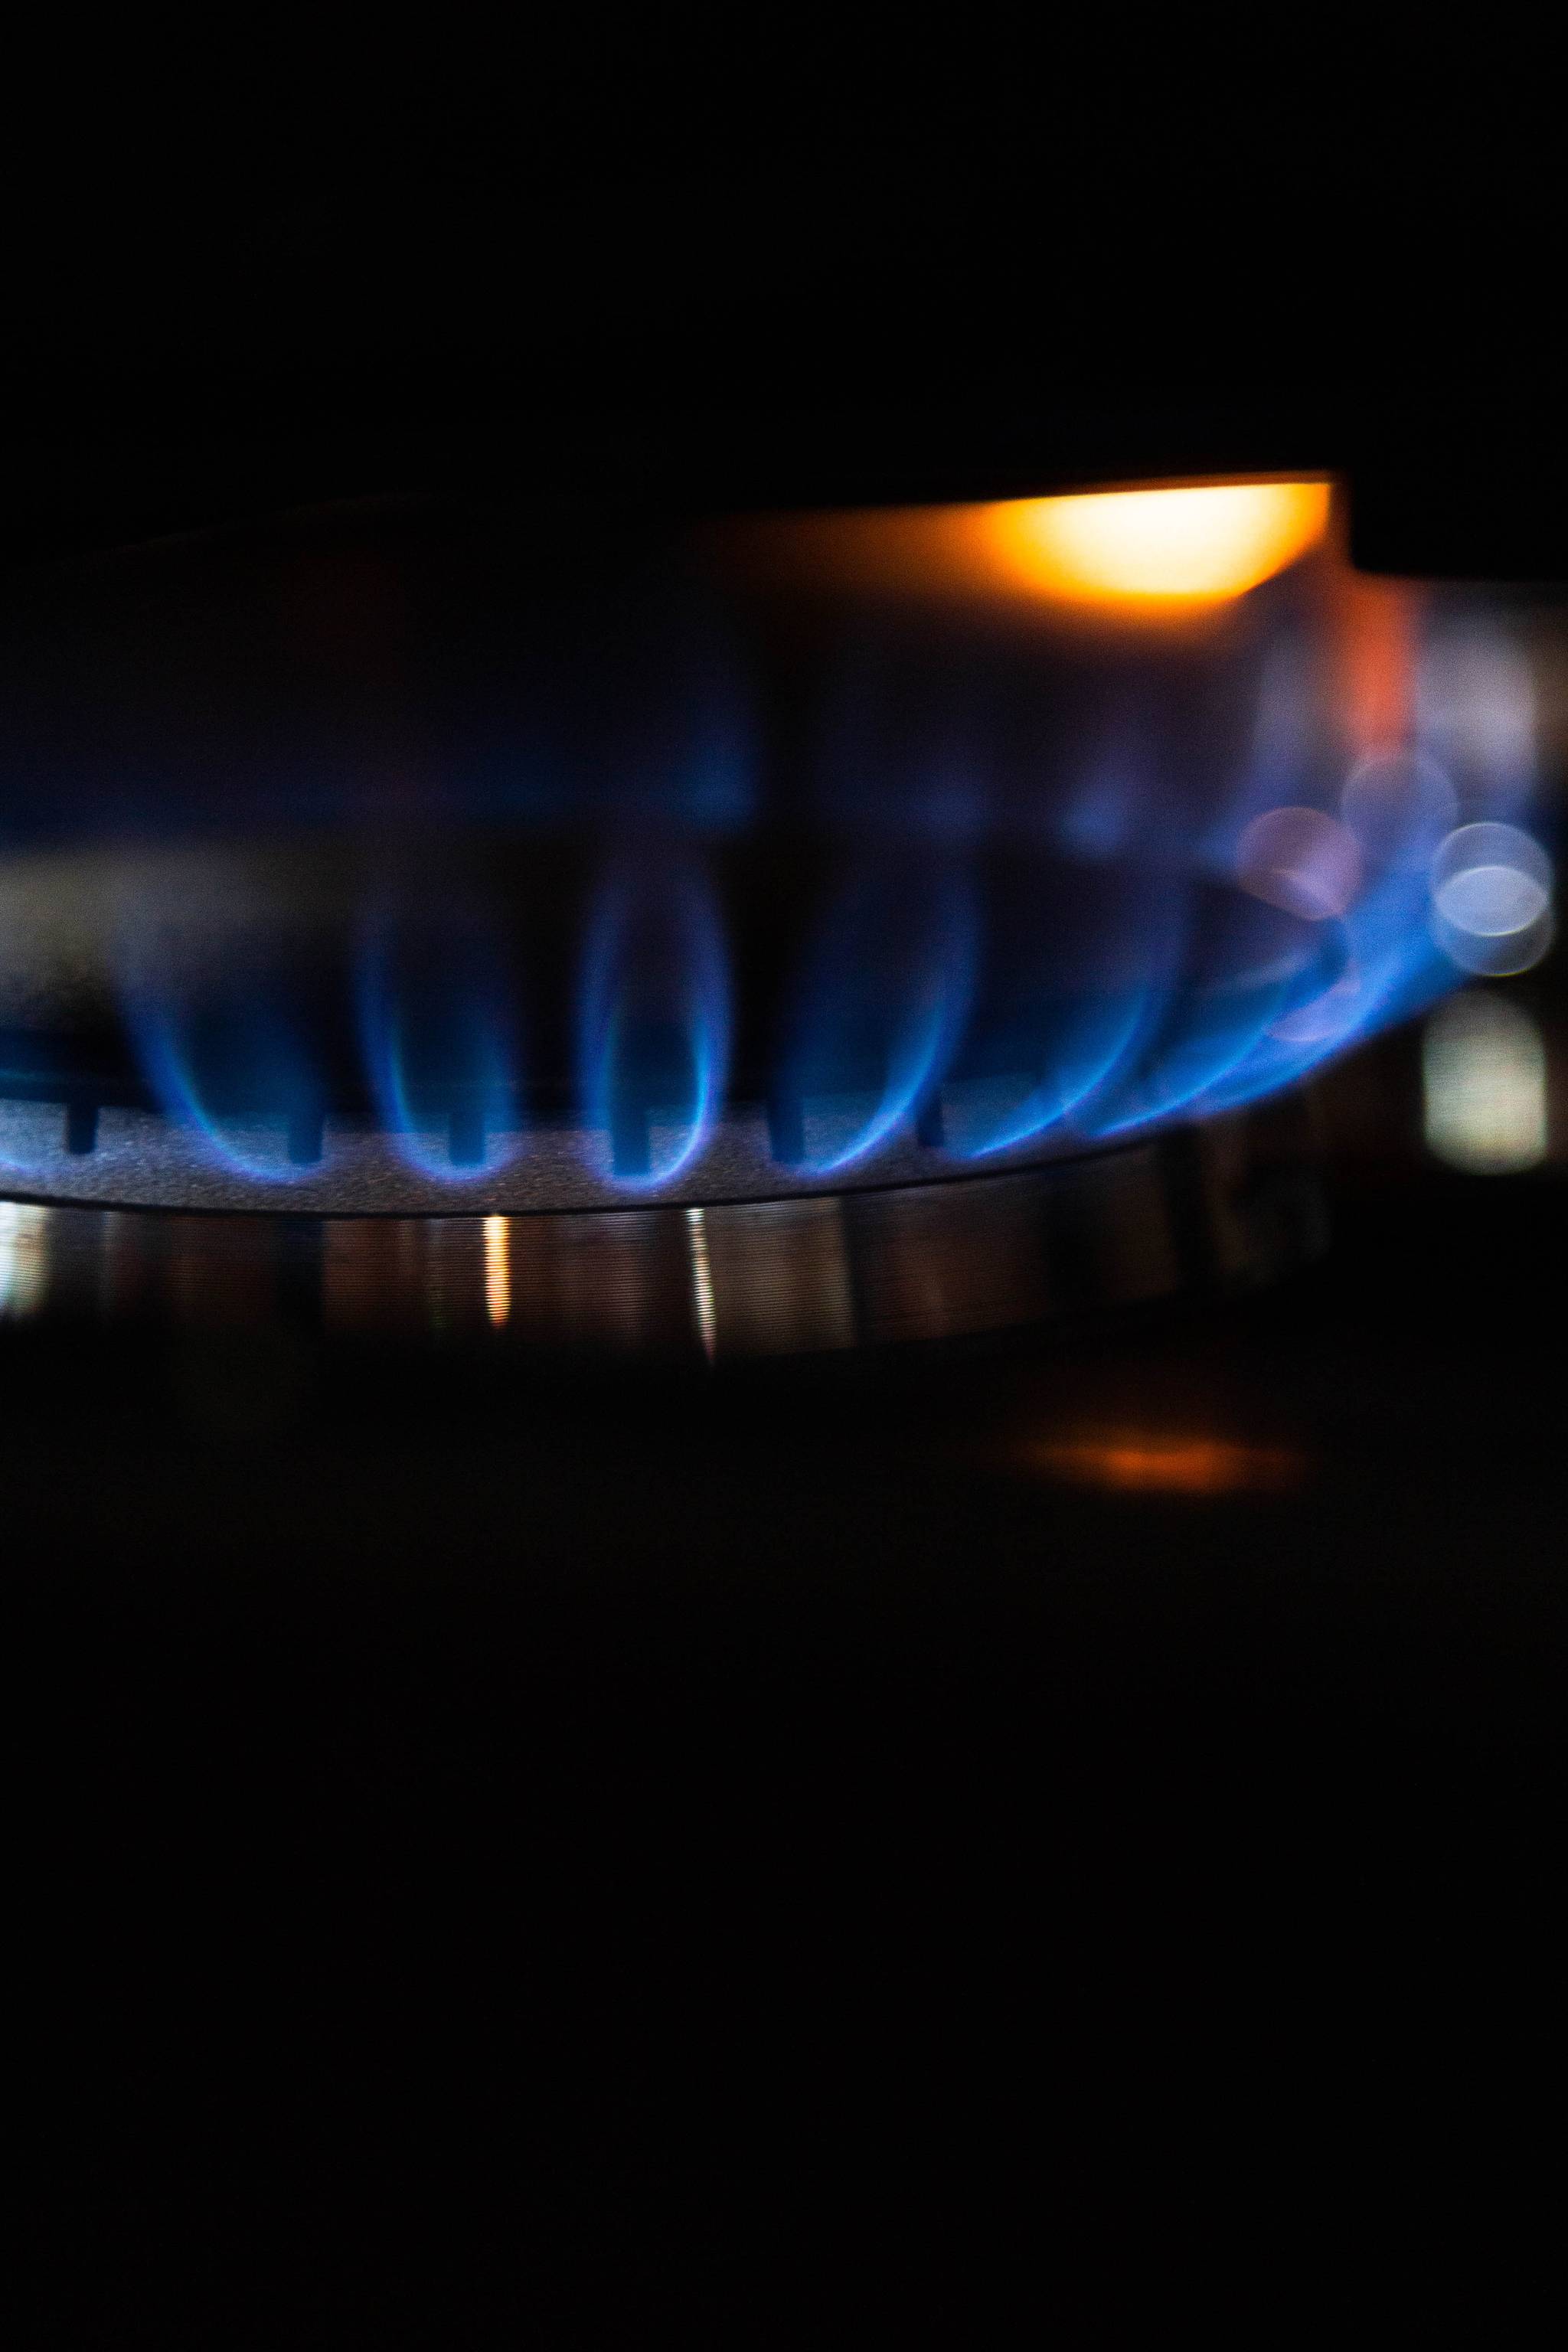 Gas stove outrage points to widening cultural divisions